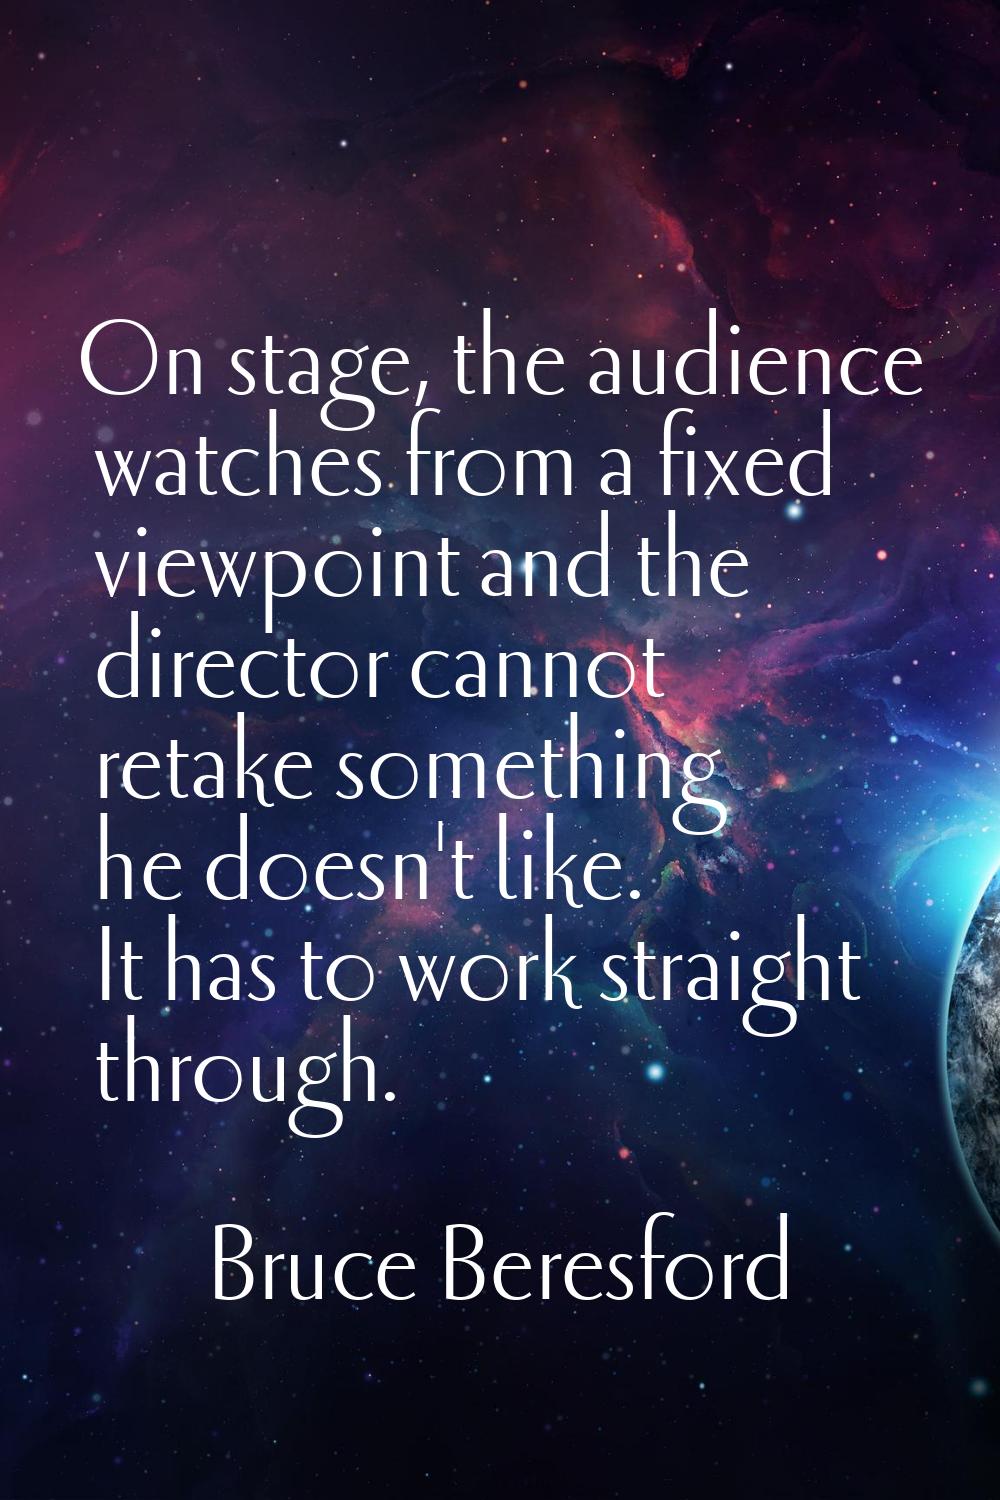 On stage, the audience watches from a fixed viewpoint and the director cannot retake something he d